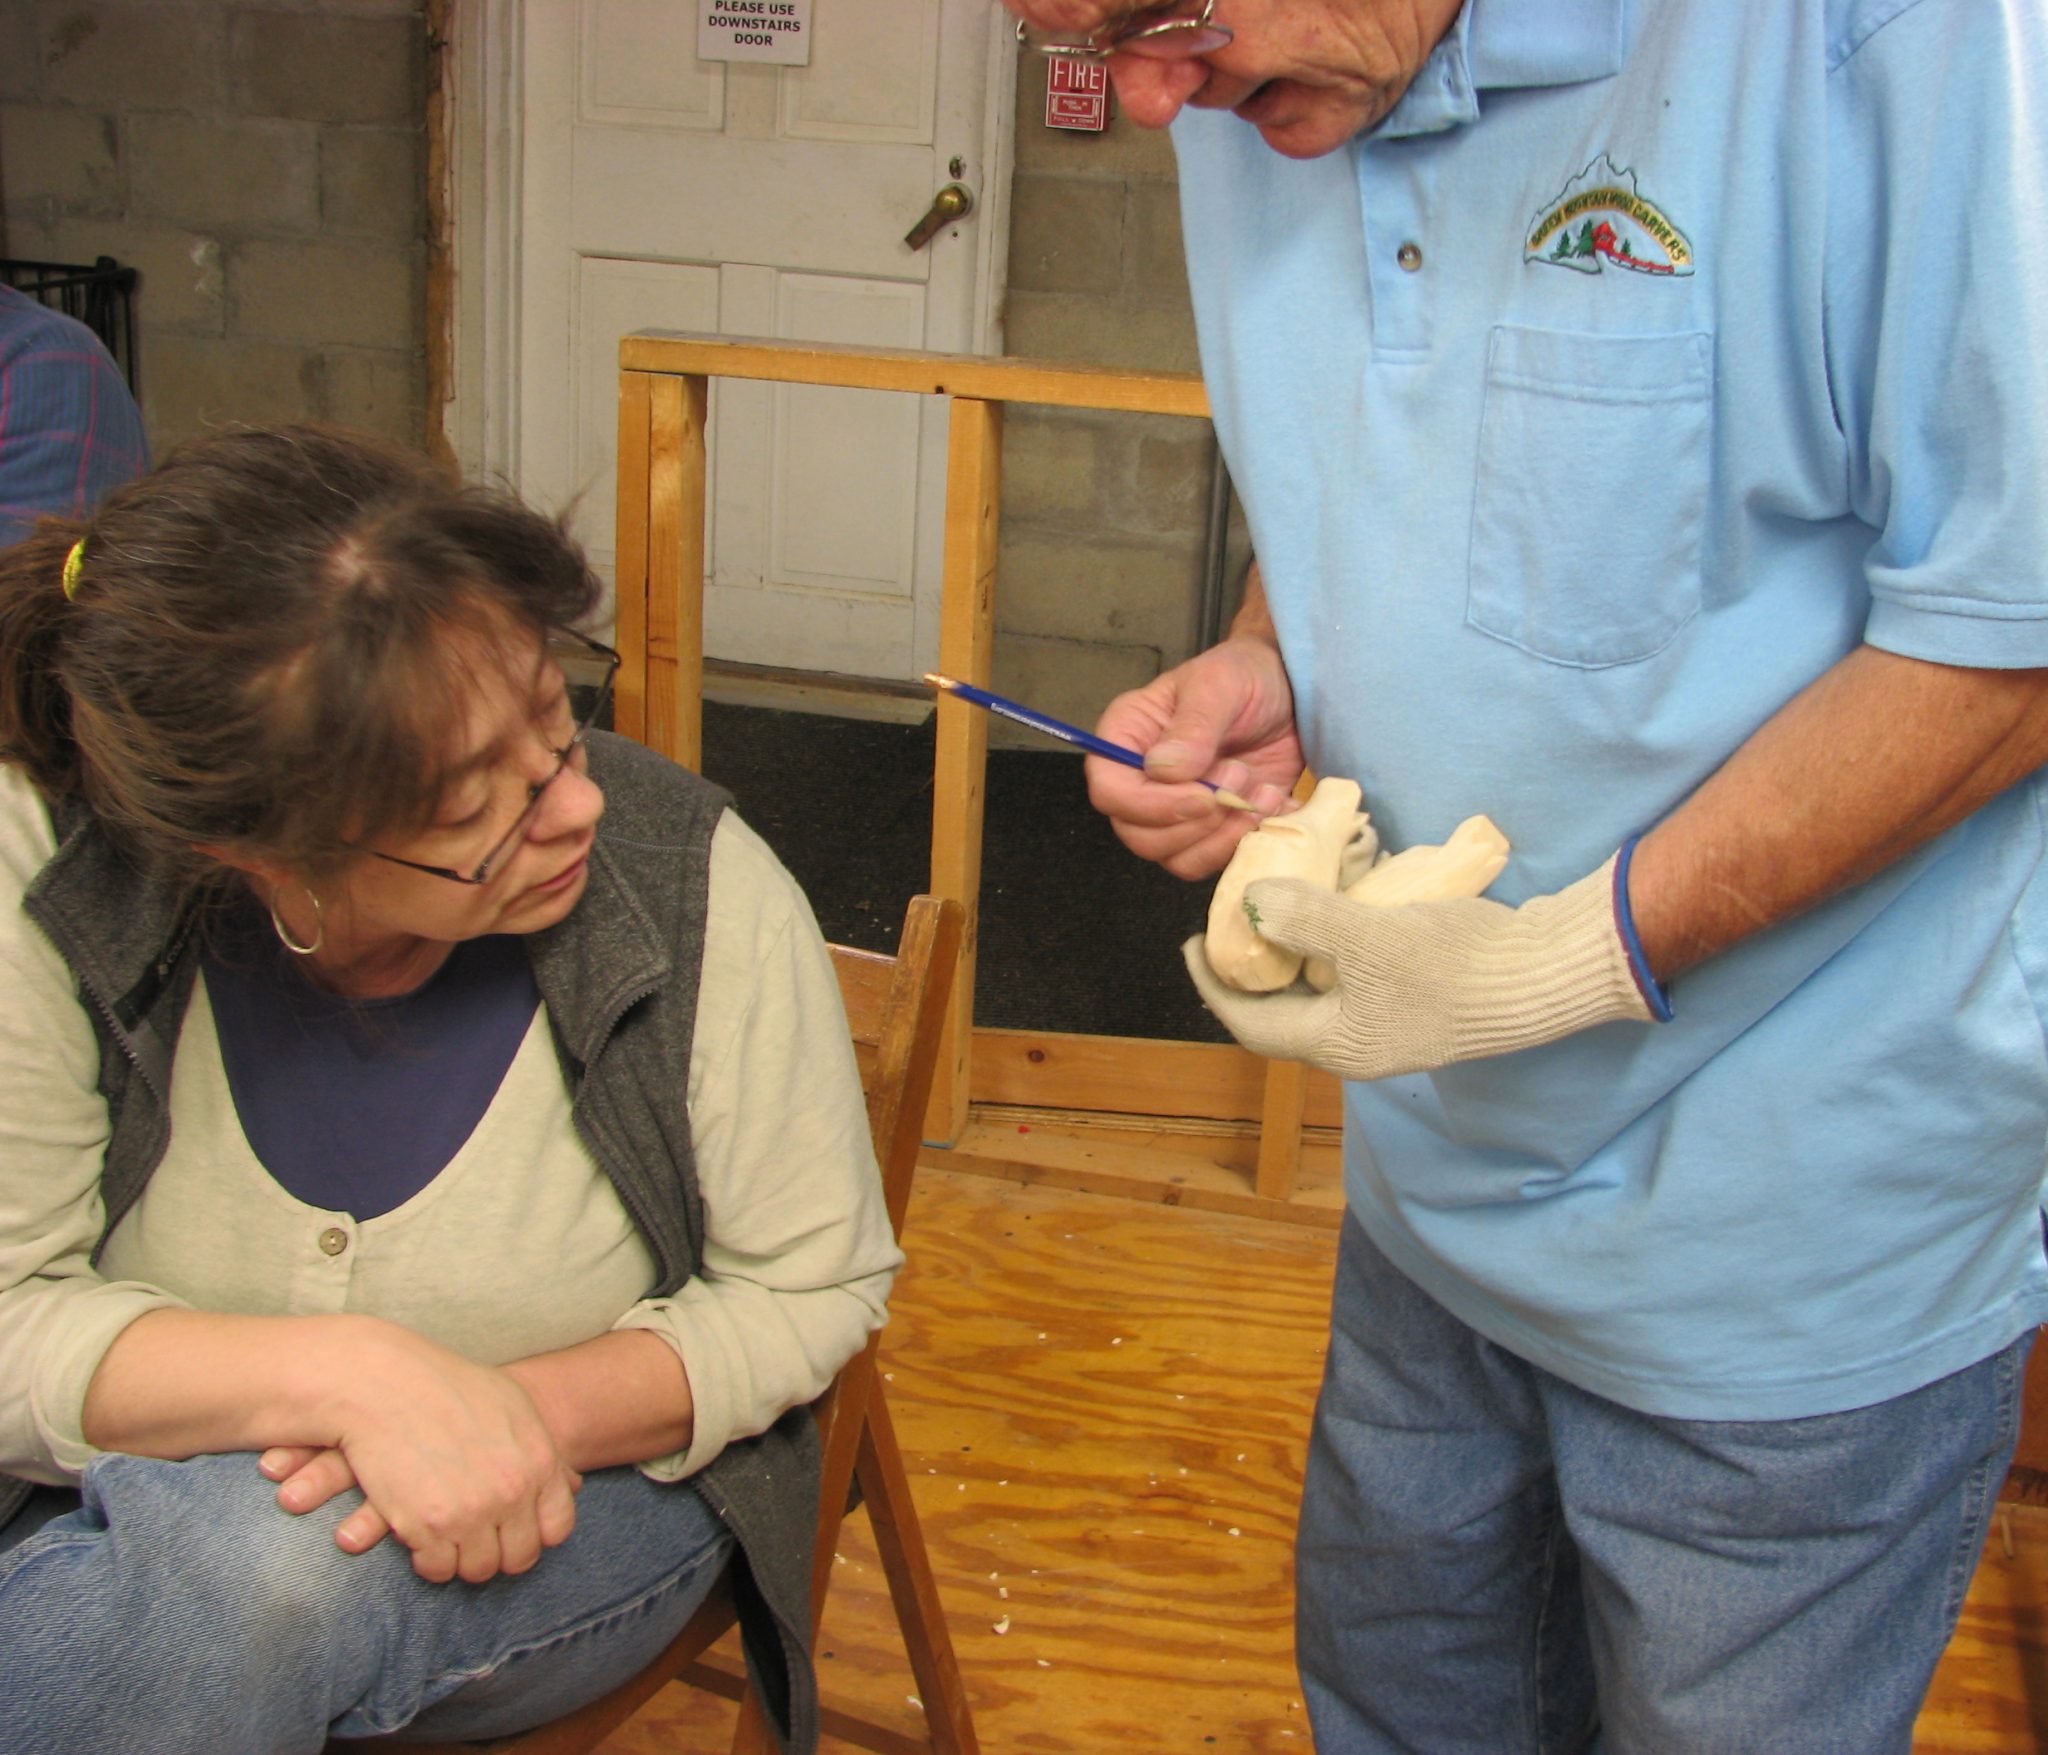 Senior man, standing, in blue shirt on right demonstrates woodcarving while adult woman, seated, looks on from left.